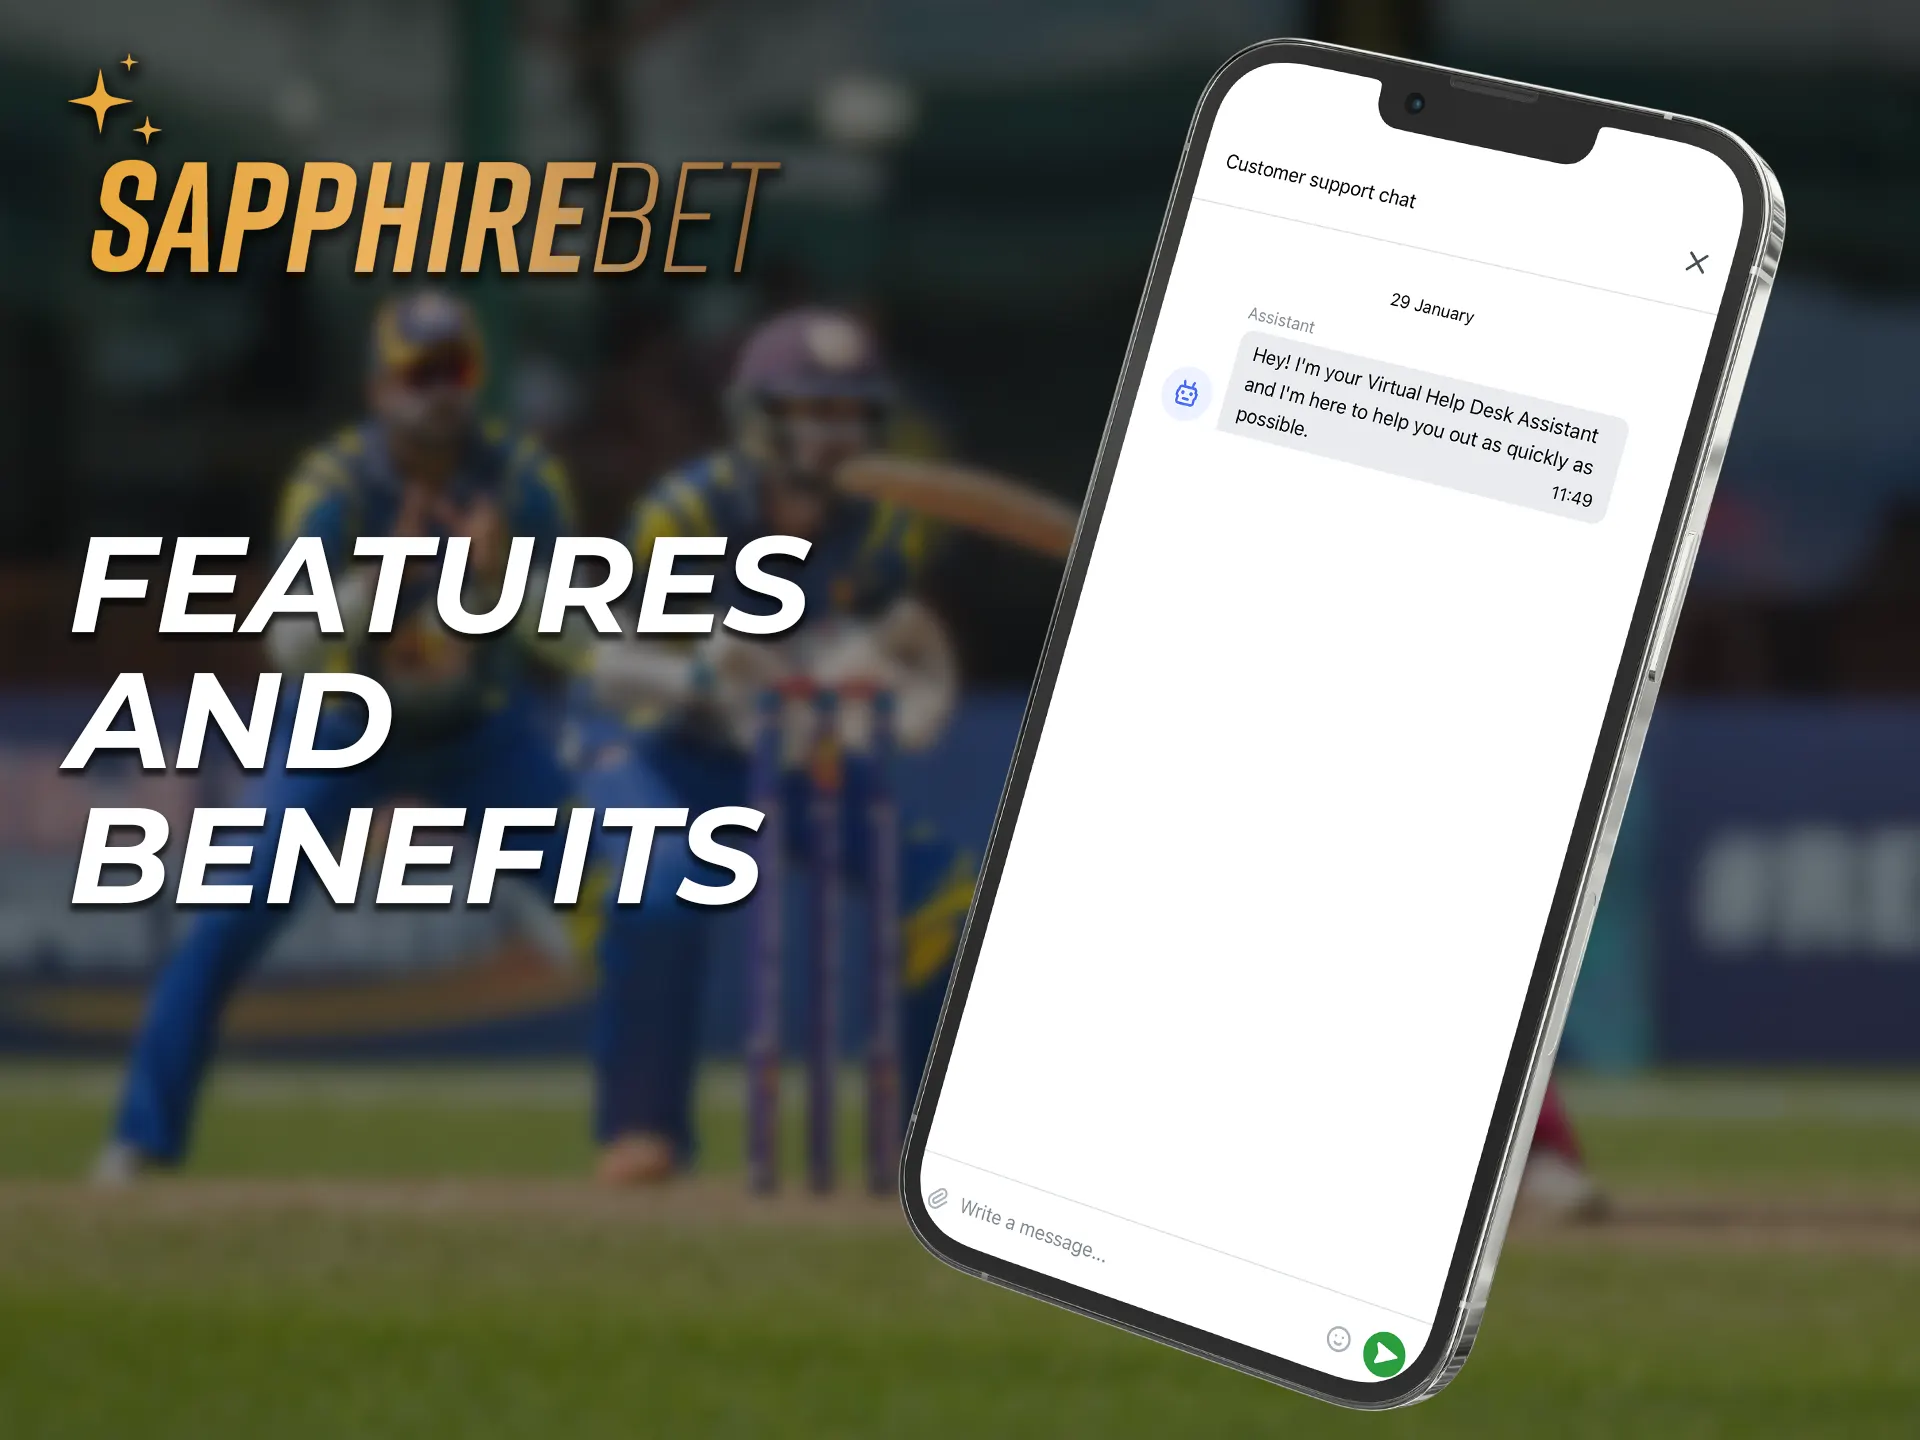 The SapphireBet app offers a number of features and benefits.